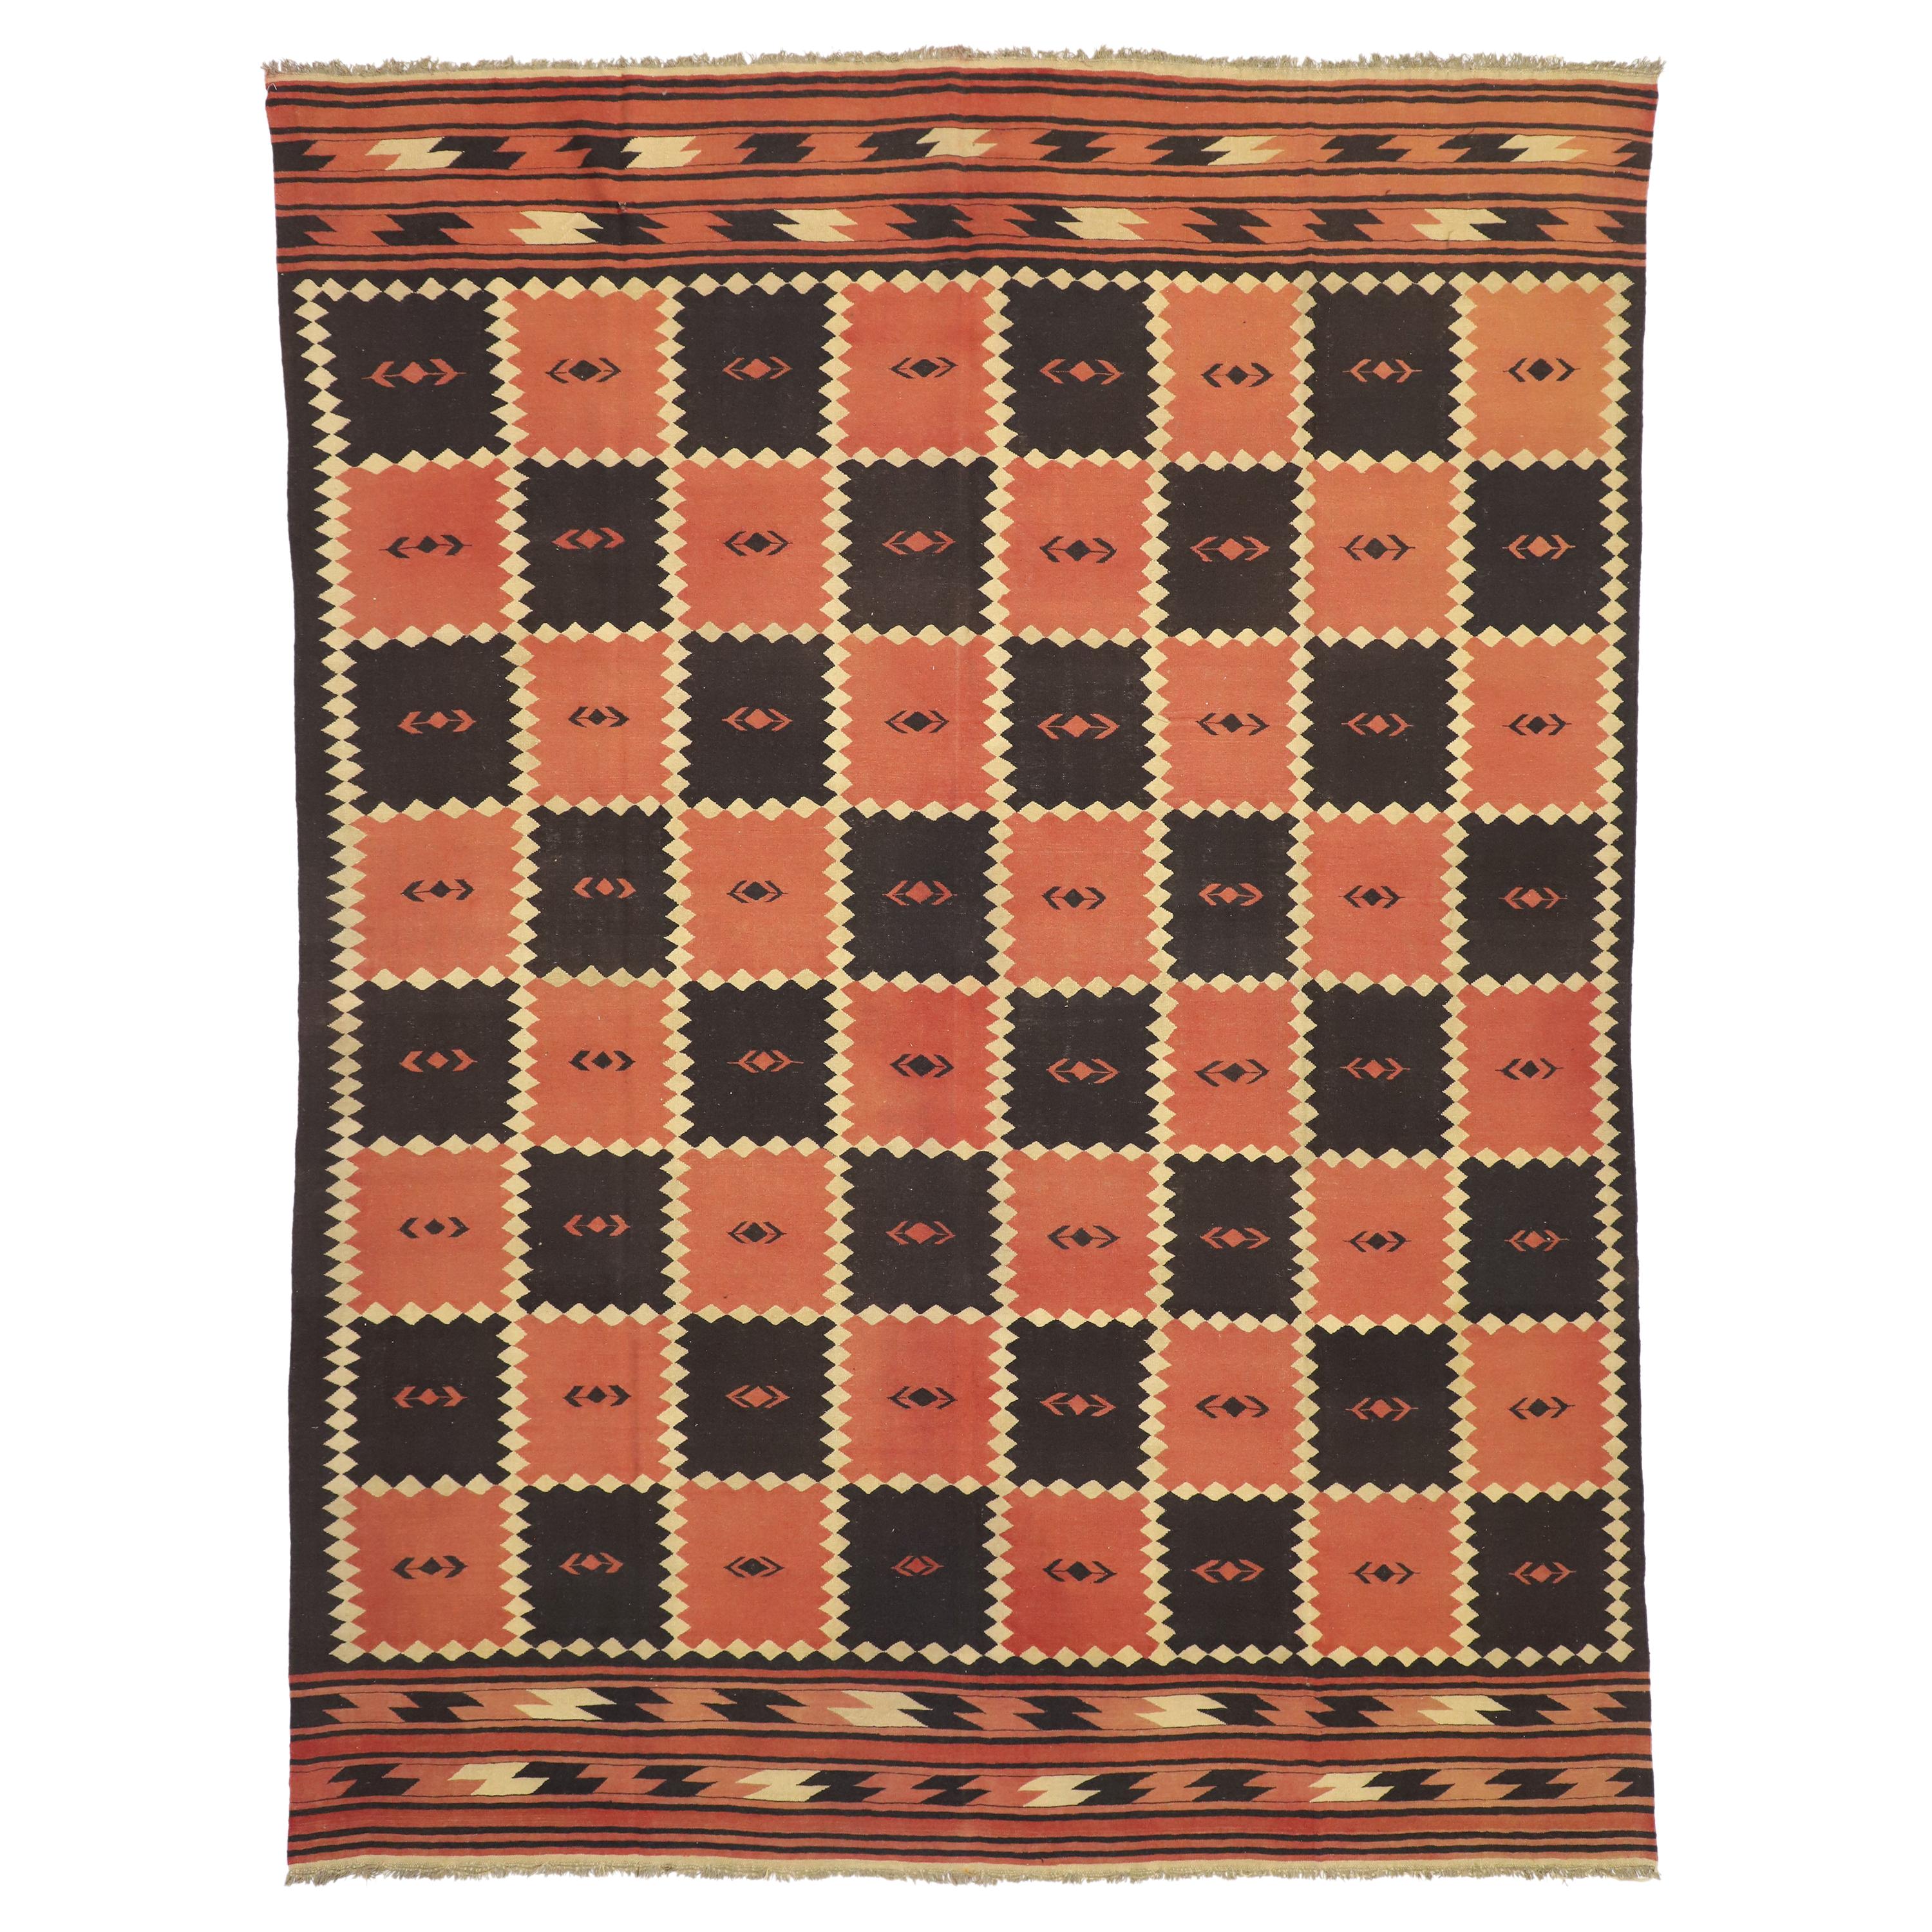 Vintage Afghani Kilim Rug with Checkerboard Design and Modern Tribal Style